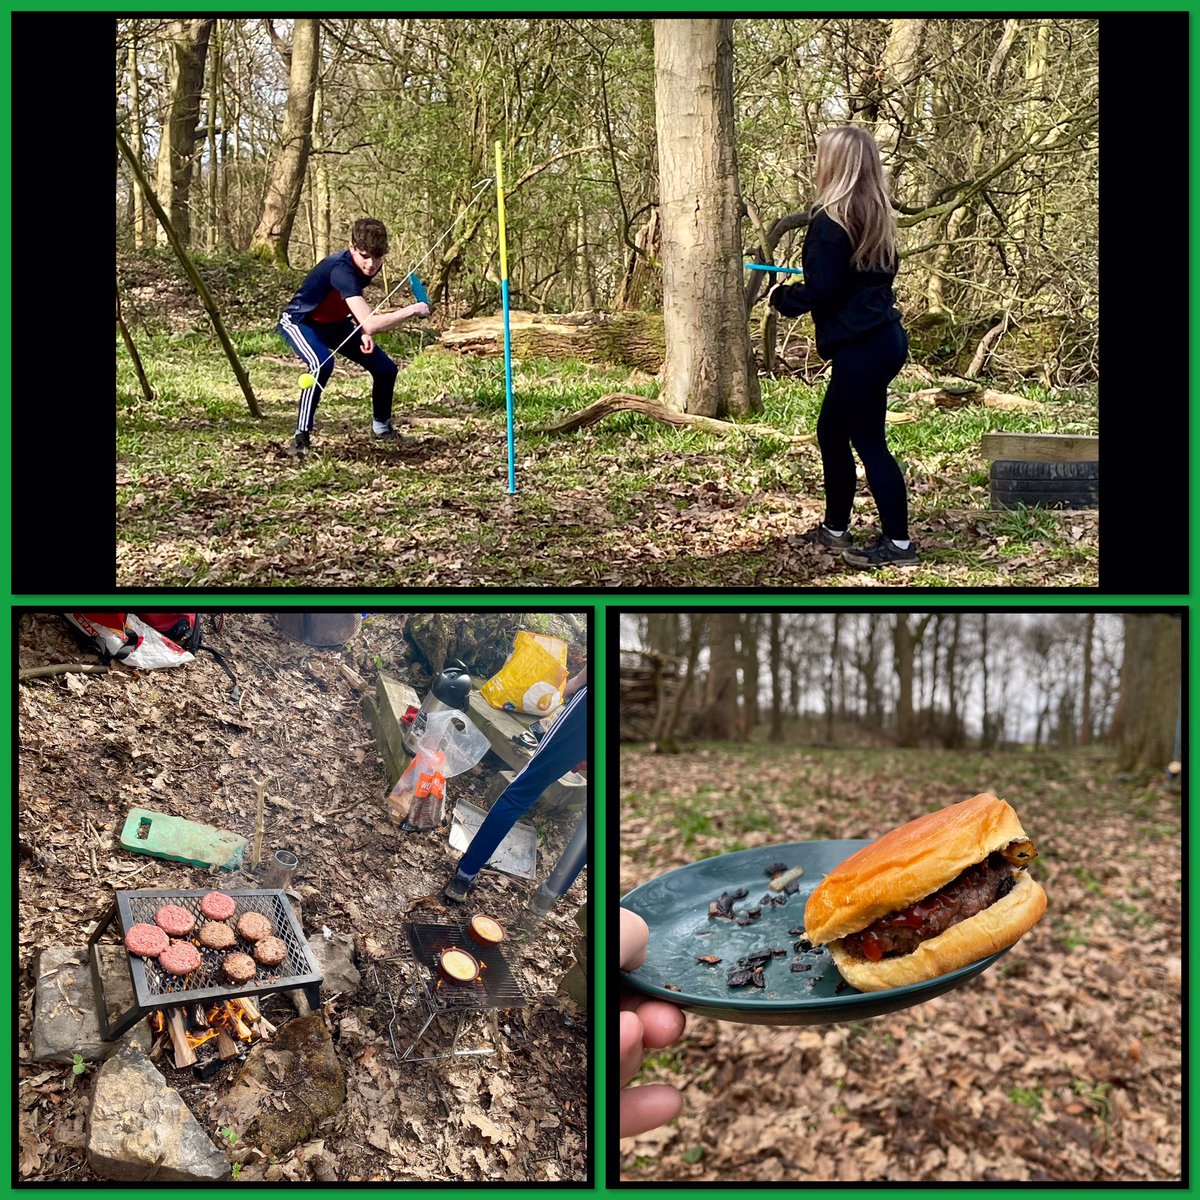 Spring is almost here at last 🌷 #forestschool students @EthosCollegeUK enjoying a bbq and a game of swing ball in the sunshine today after completing their mock exams last week ☀️ #SEMH #happy #Spring